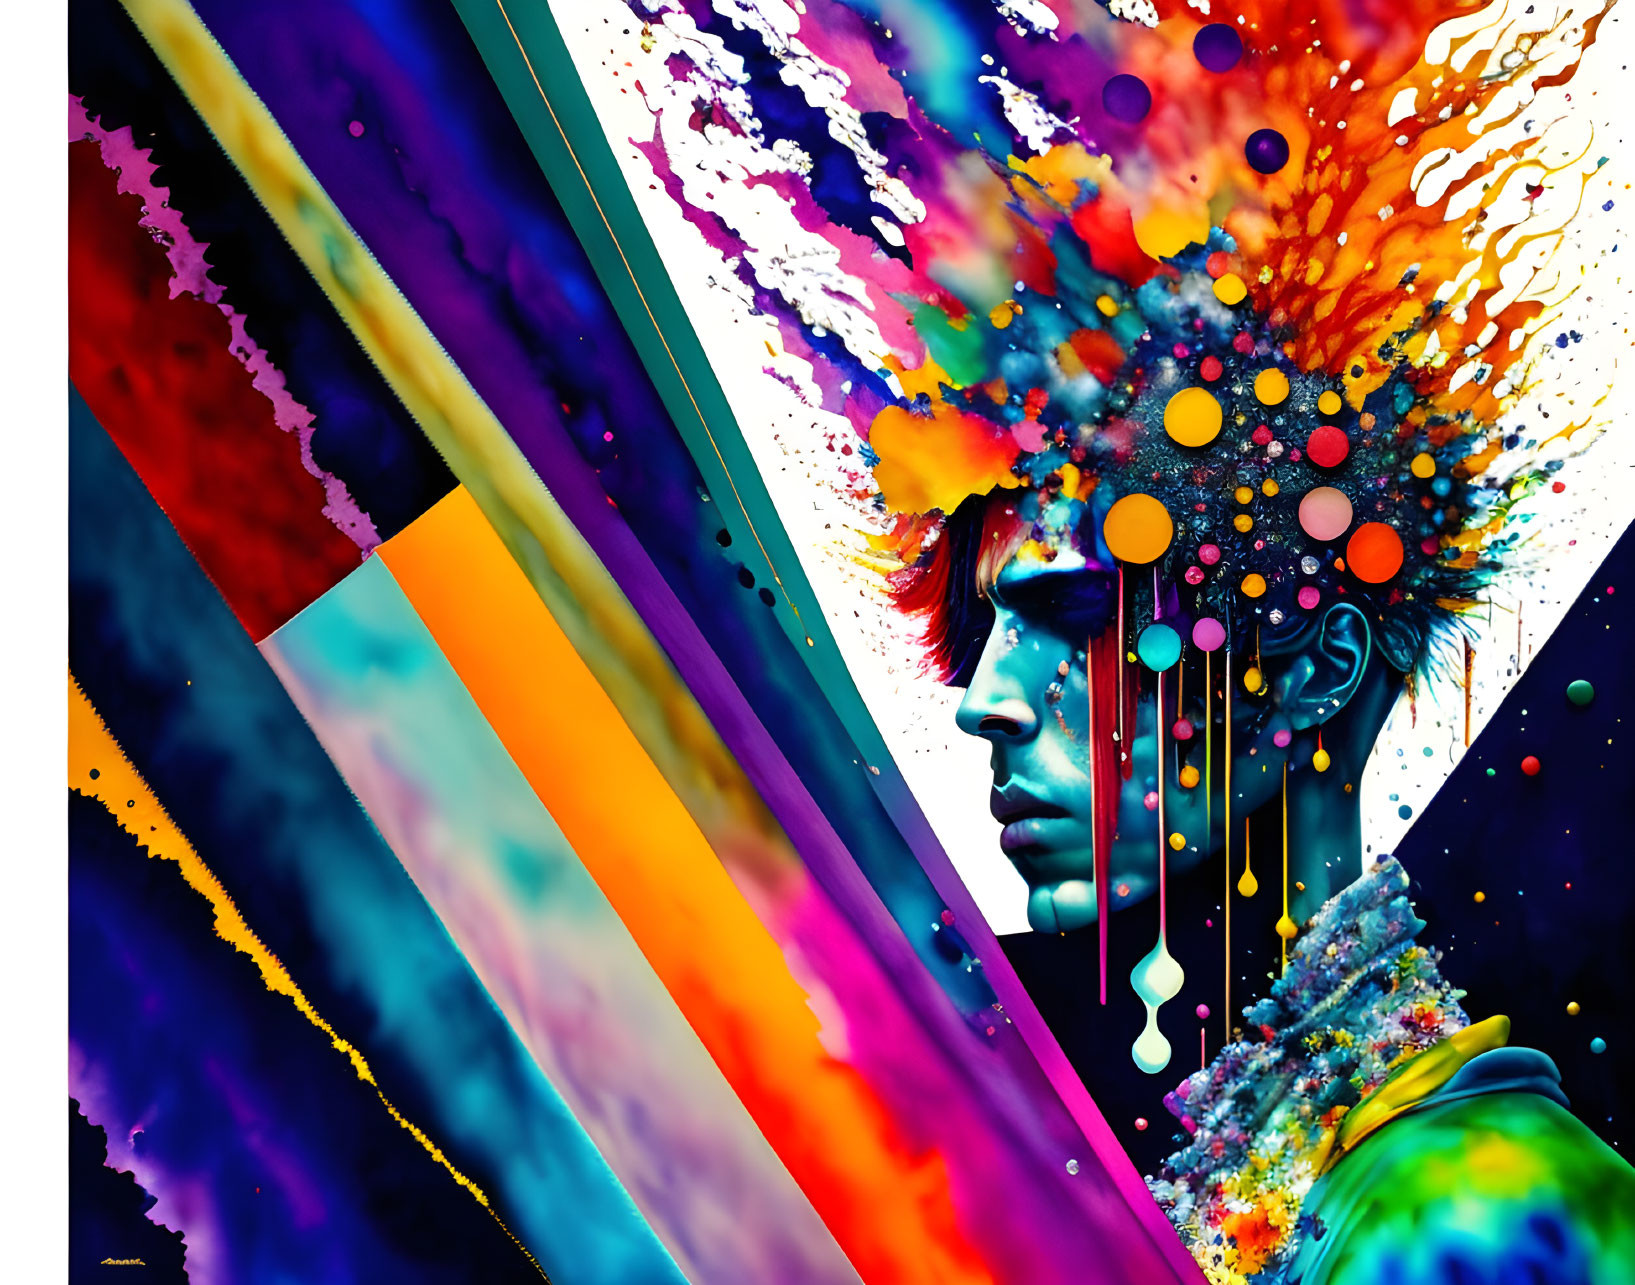 Colorful Abstract Portrait with Geometric Shapes and Contemplative Face